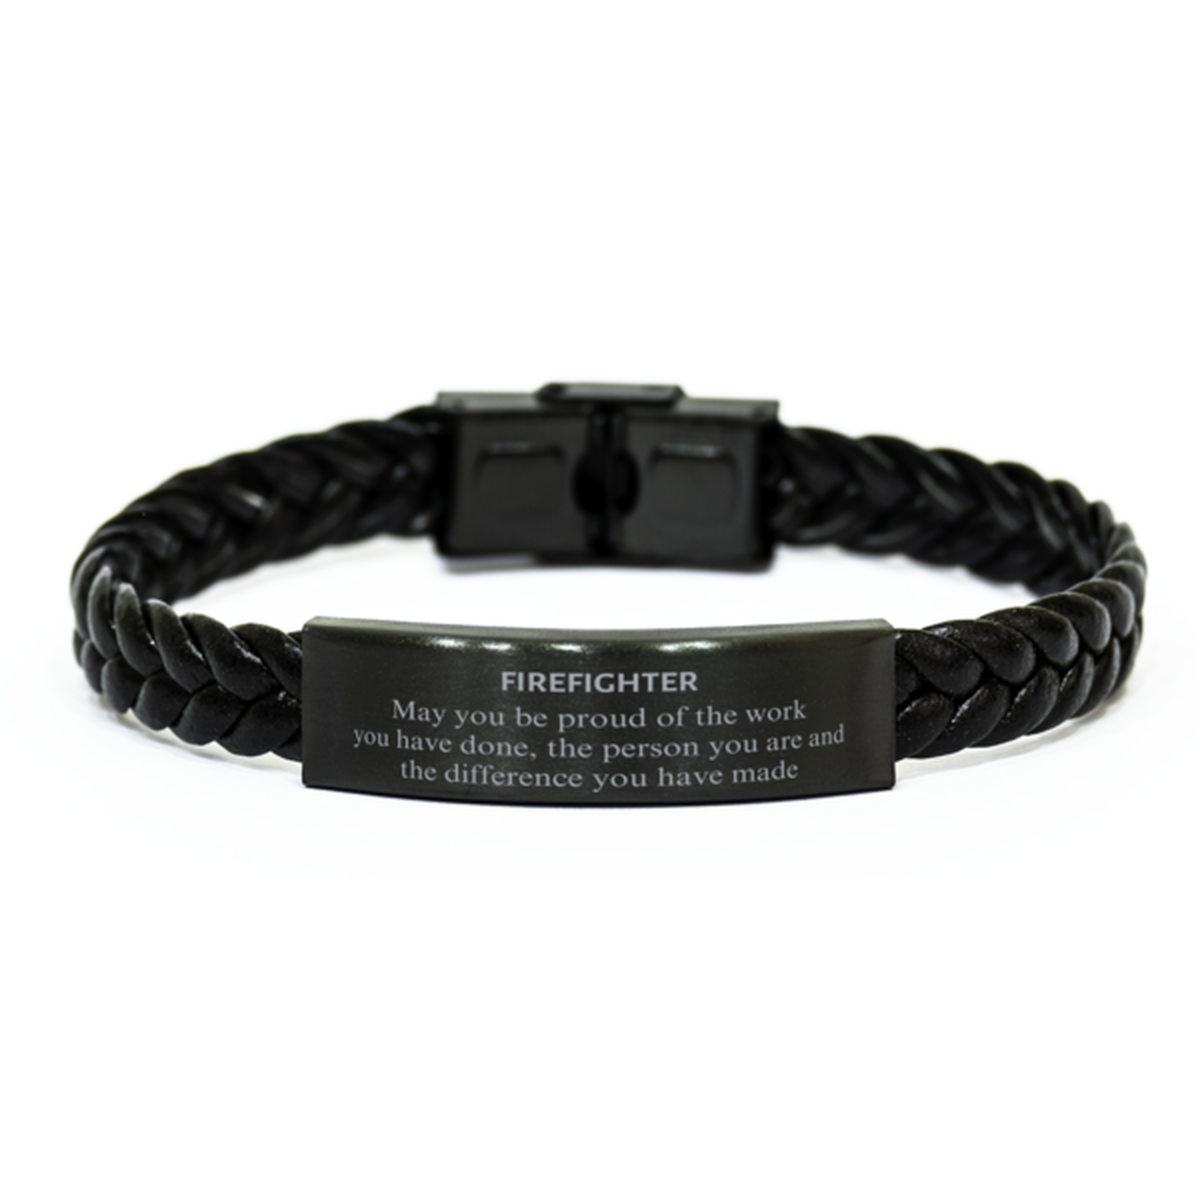 Firefighter May you be proud of the work you have done, Retirement Firefighter Braided Leather Bracelet for Colleague Appreciation Gifts Amazing for Firefighter